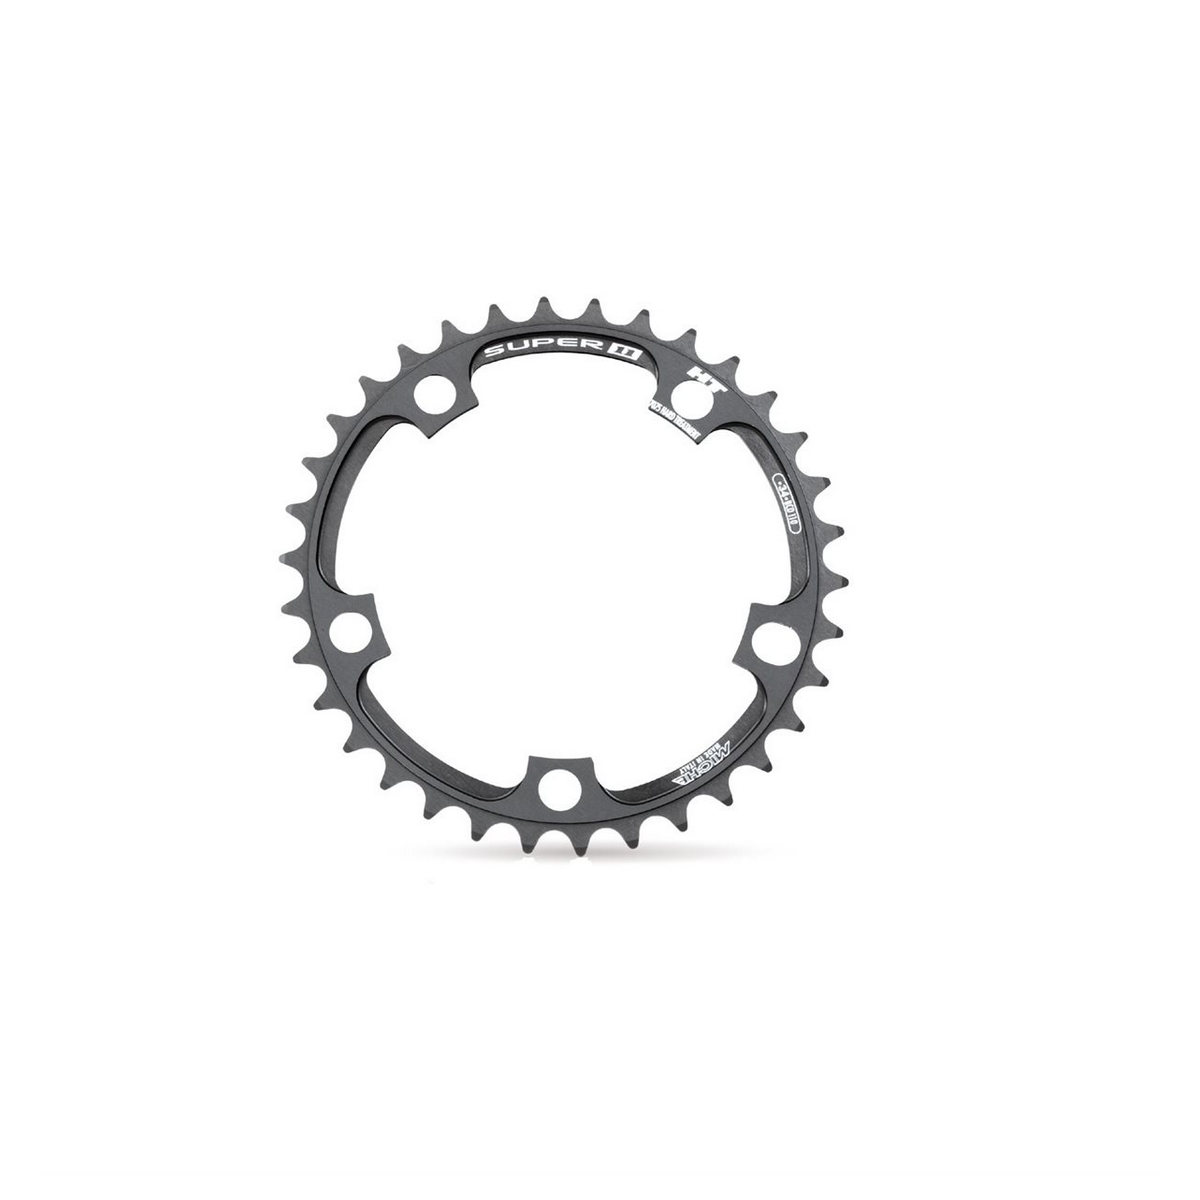 Inner chainring Super 11 bcd 110mm 34T Campagnolo 11 speed